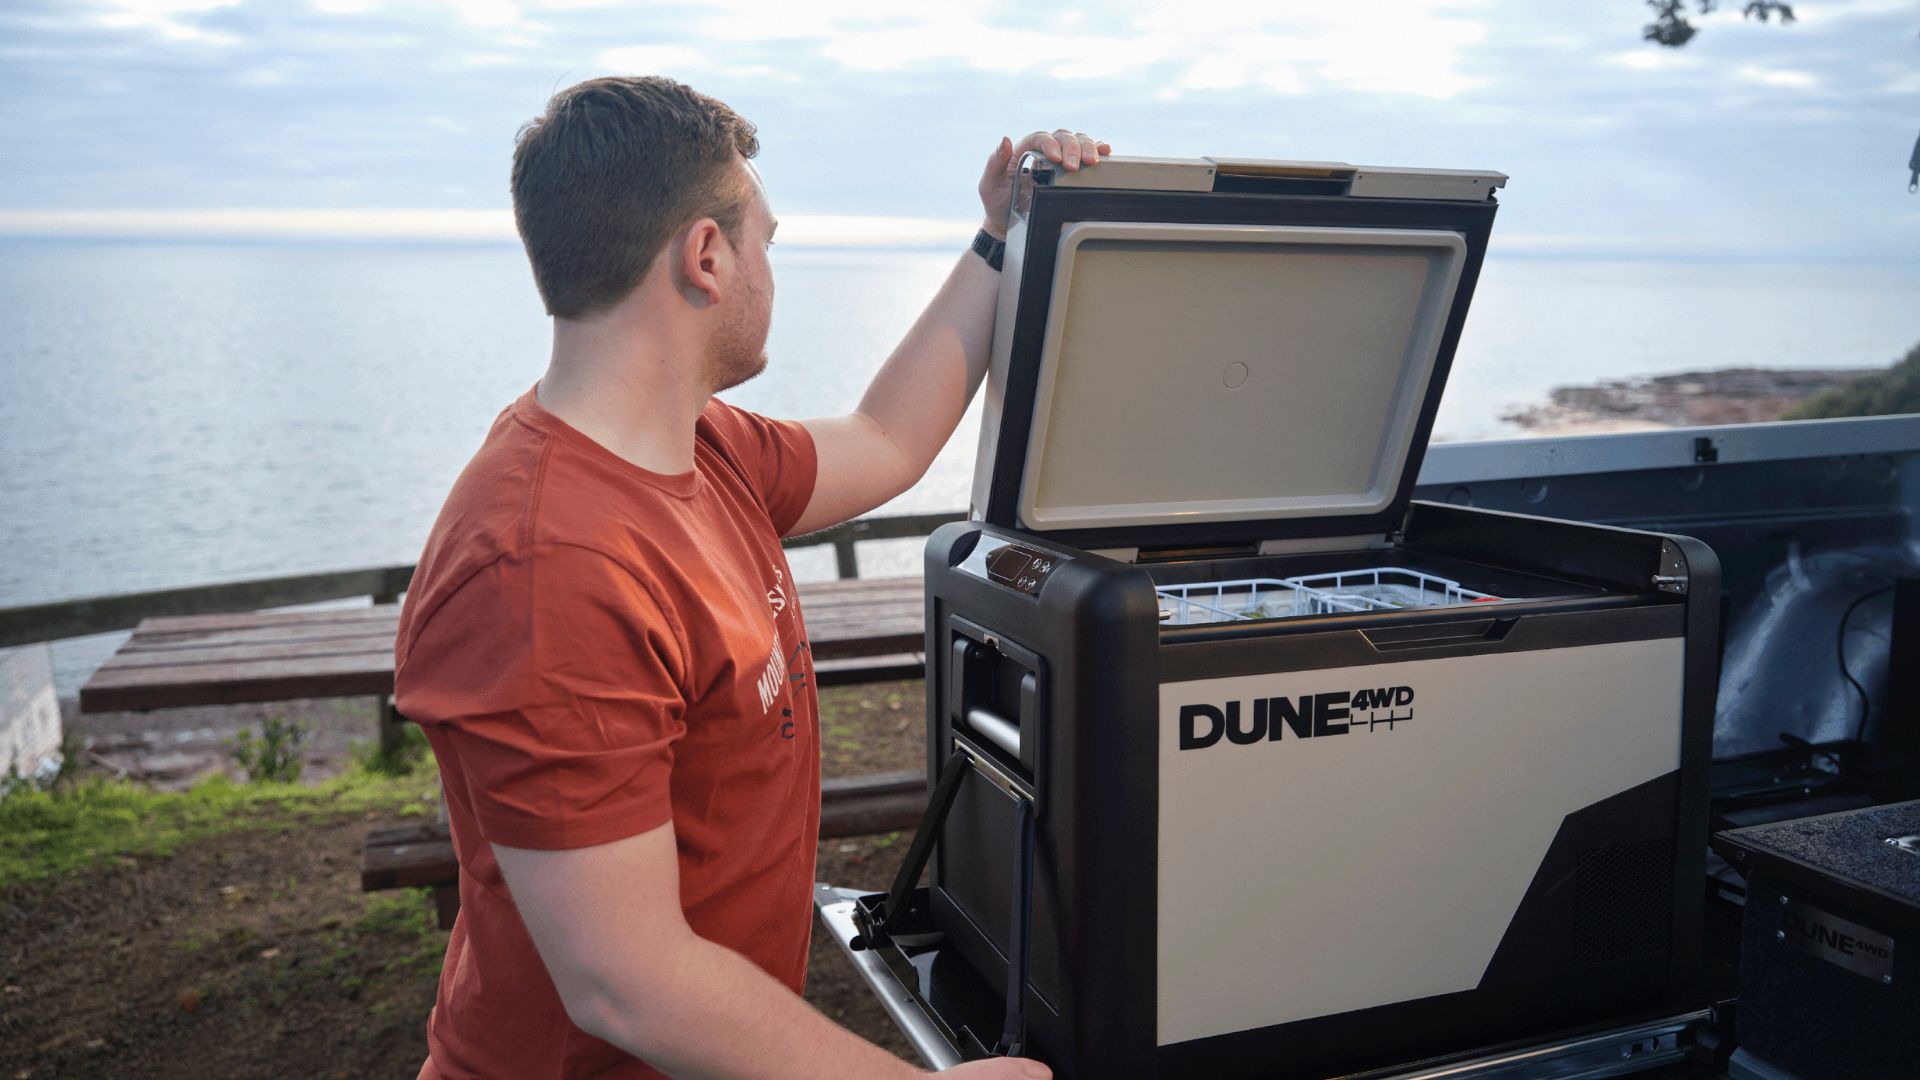 Dune 4WD 45L Single Zone Fridge/Freezer is simple to use and energy efficient